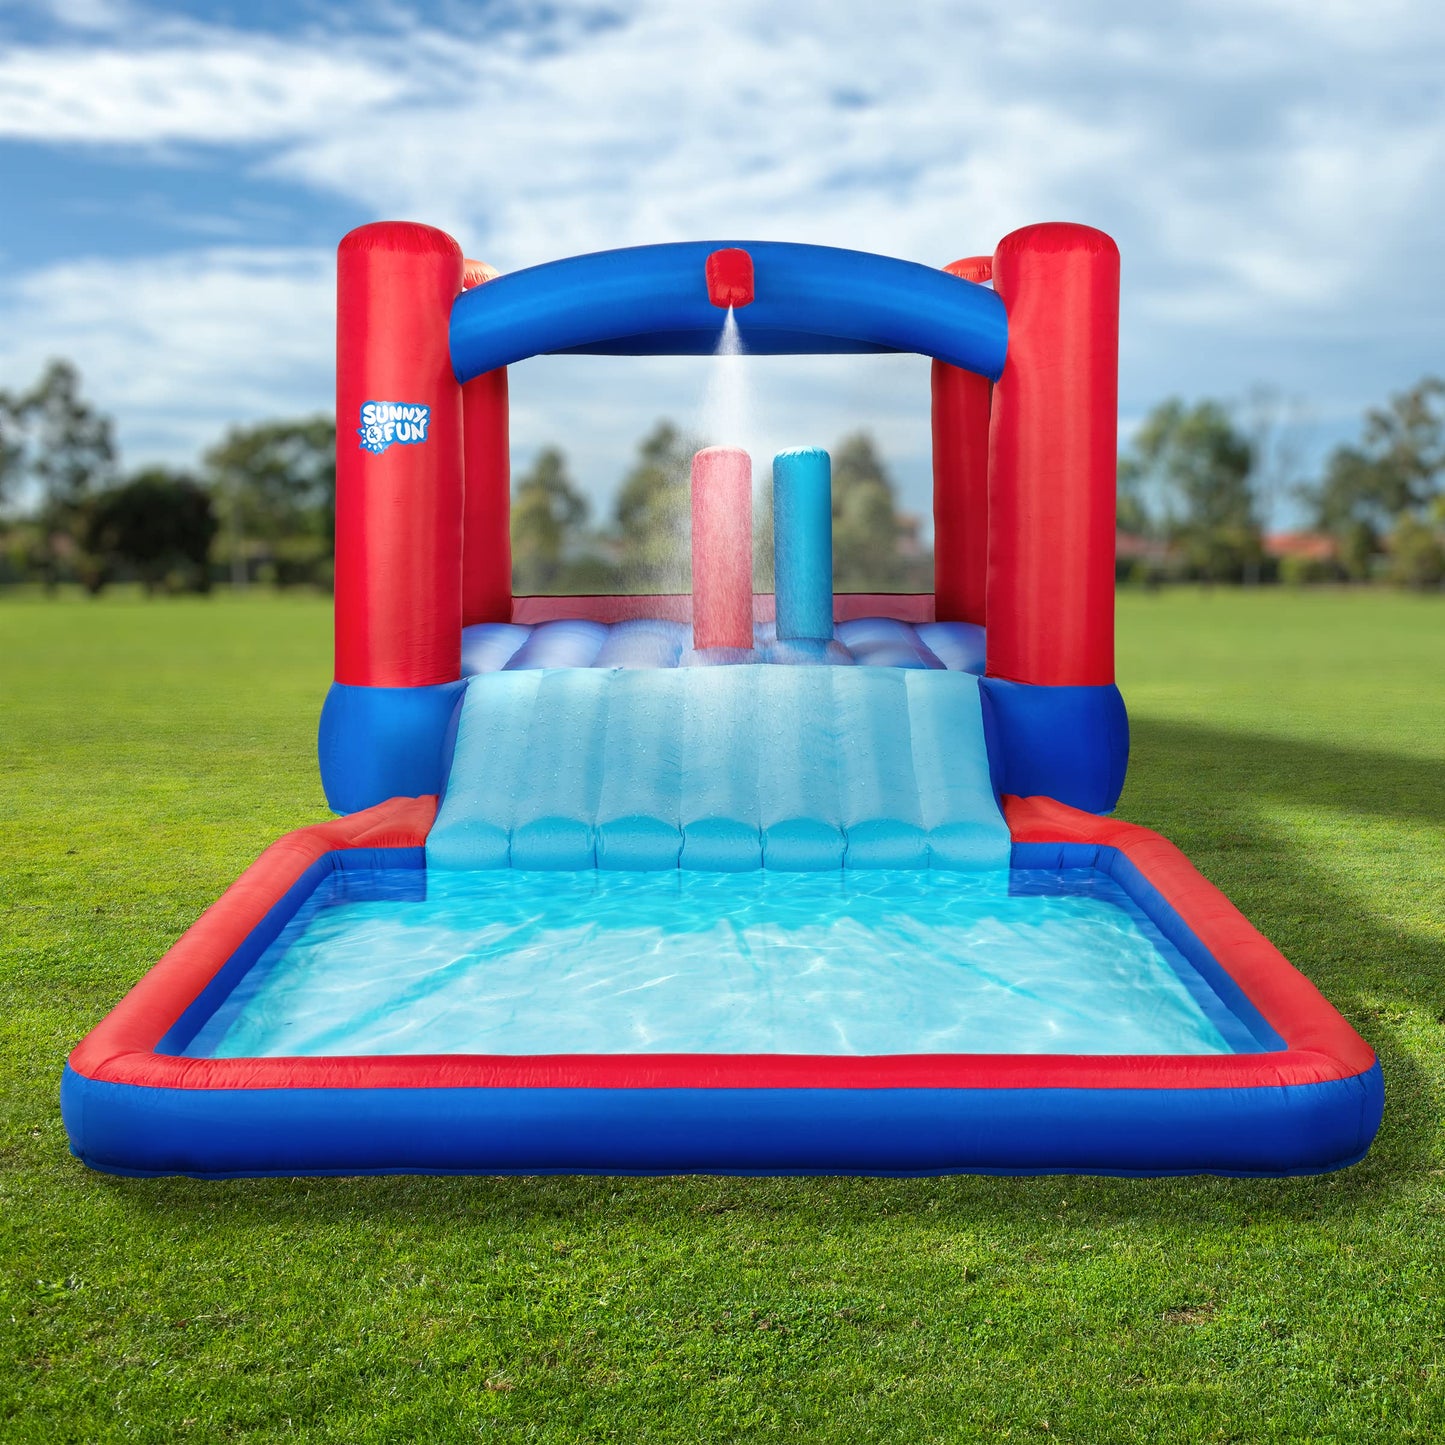 Sunny & Fun Slide N’ Splash Bounce House Inflatable Water Slide Park – Heavy-Duty for Outdoor Fun, Wide Slide & Splash Pool – Easy to Set Up & Inflate with Included Air Pump & Carrying Case